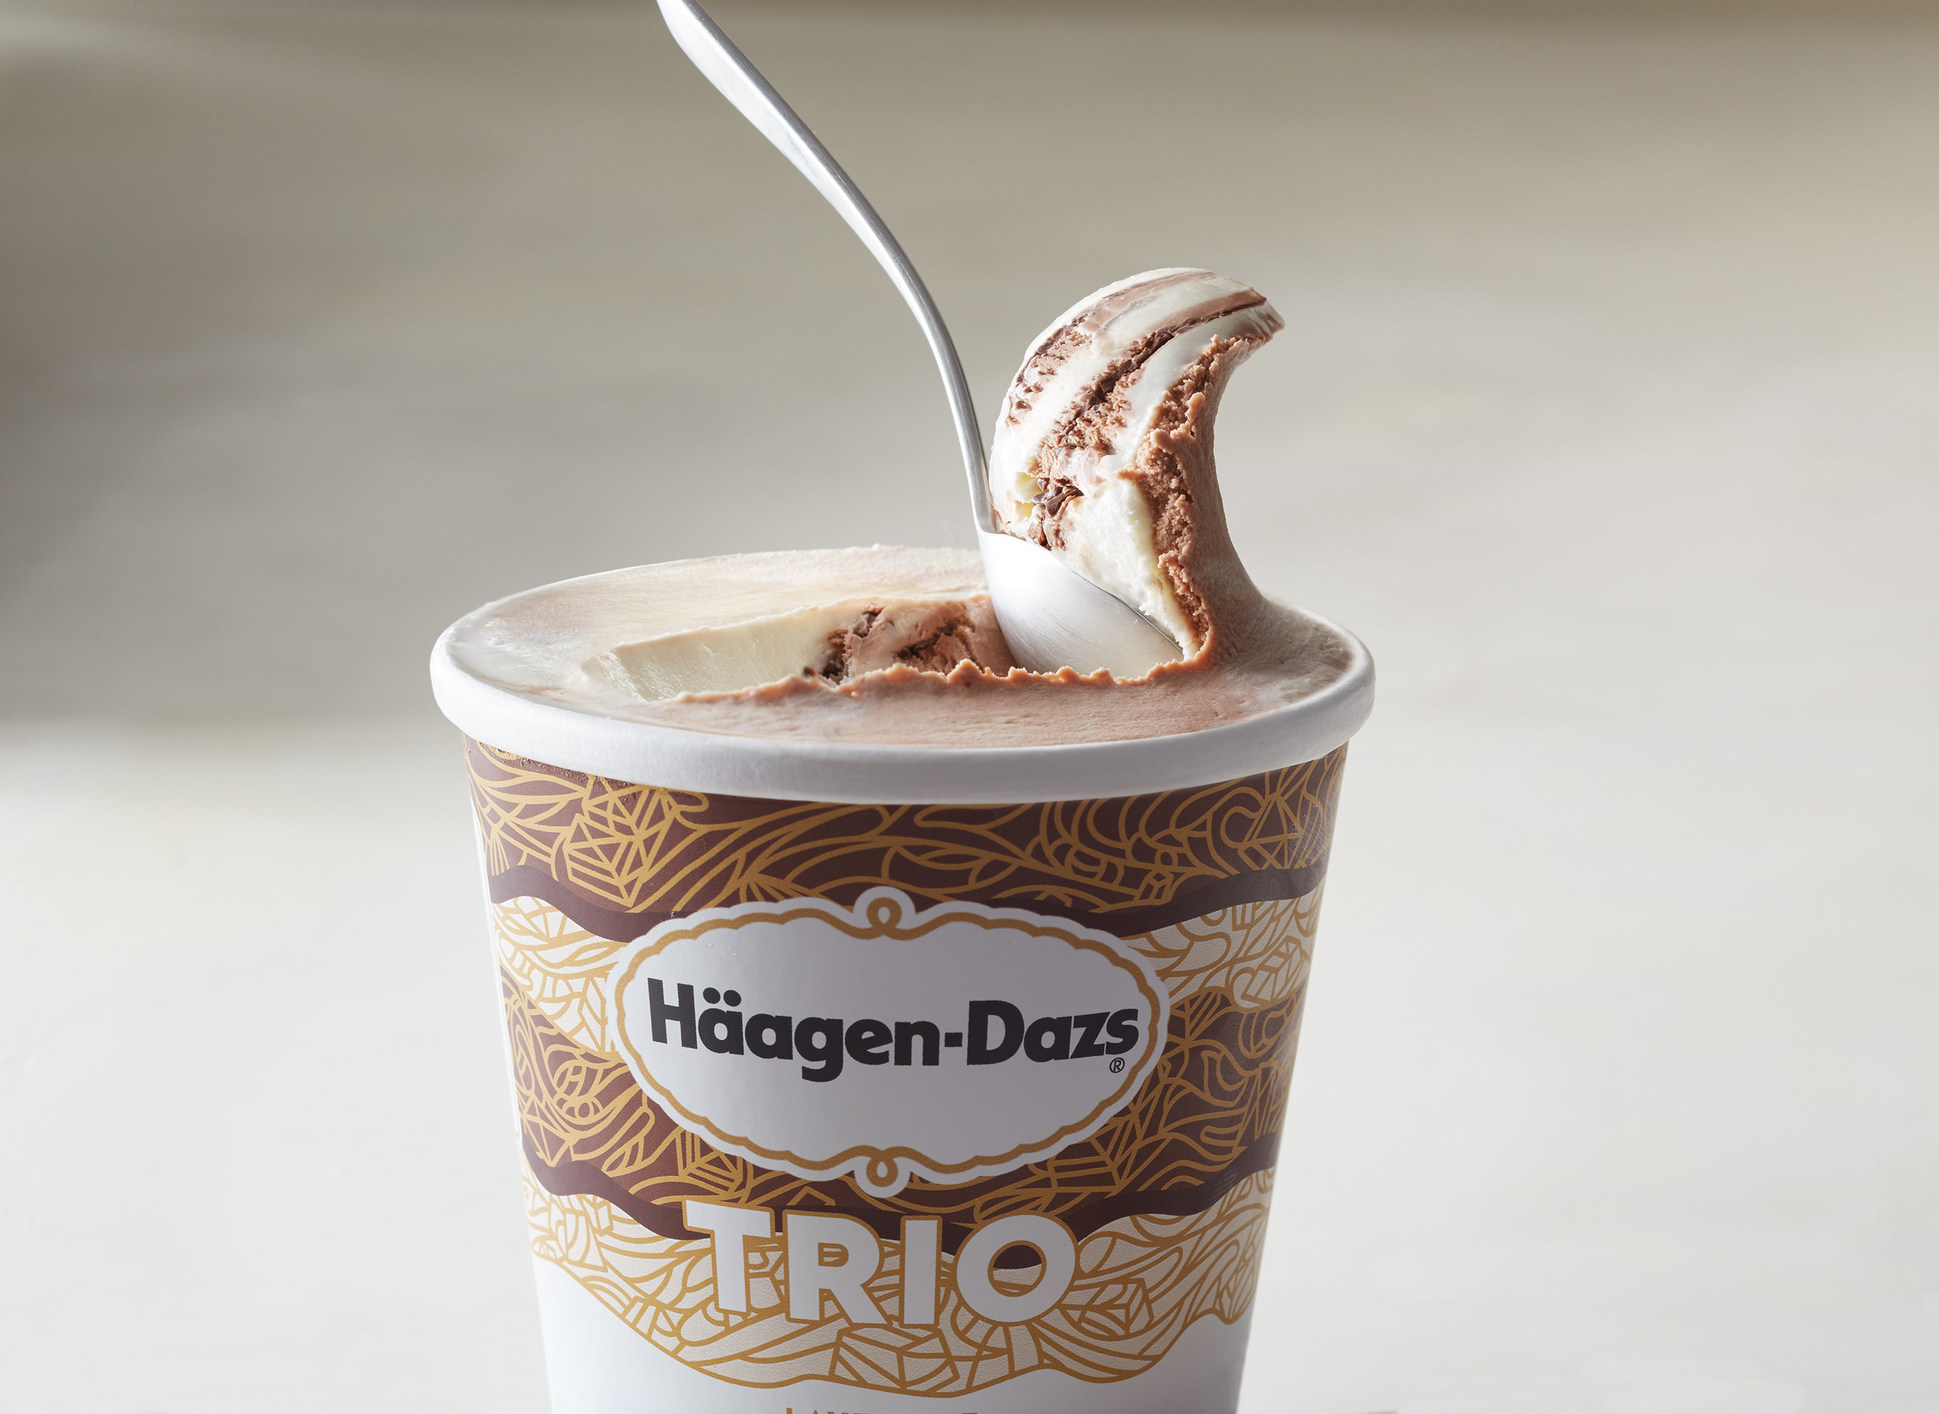 Layers Unveils Decadent and Häagen-Dazs® Brand Layers New Collection TRIO in of Combinations The